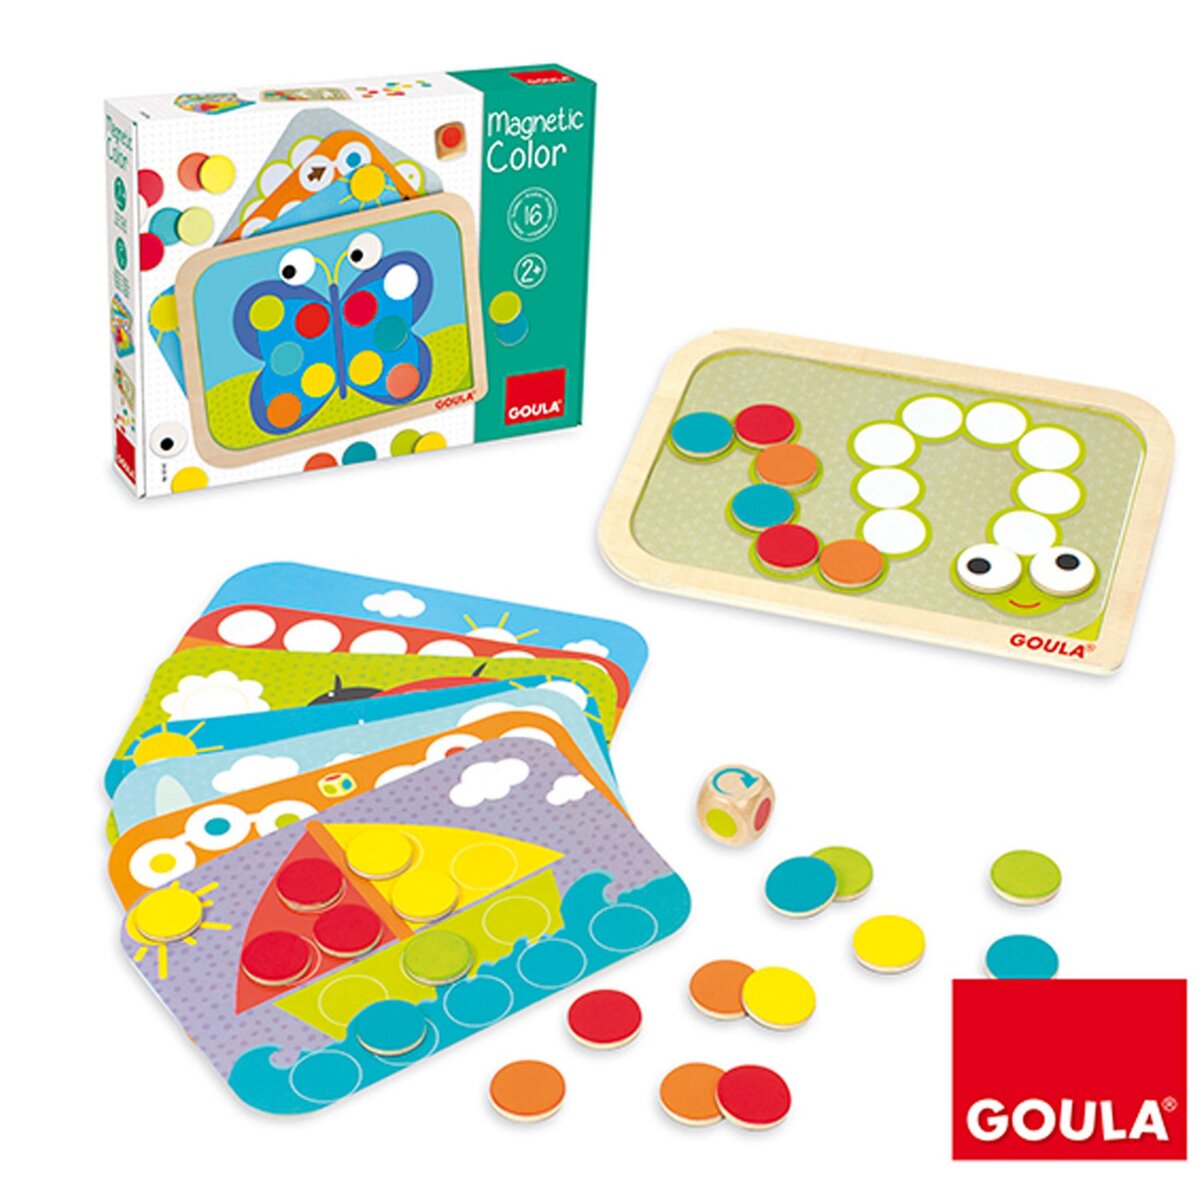 Goula Magnetic Color